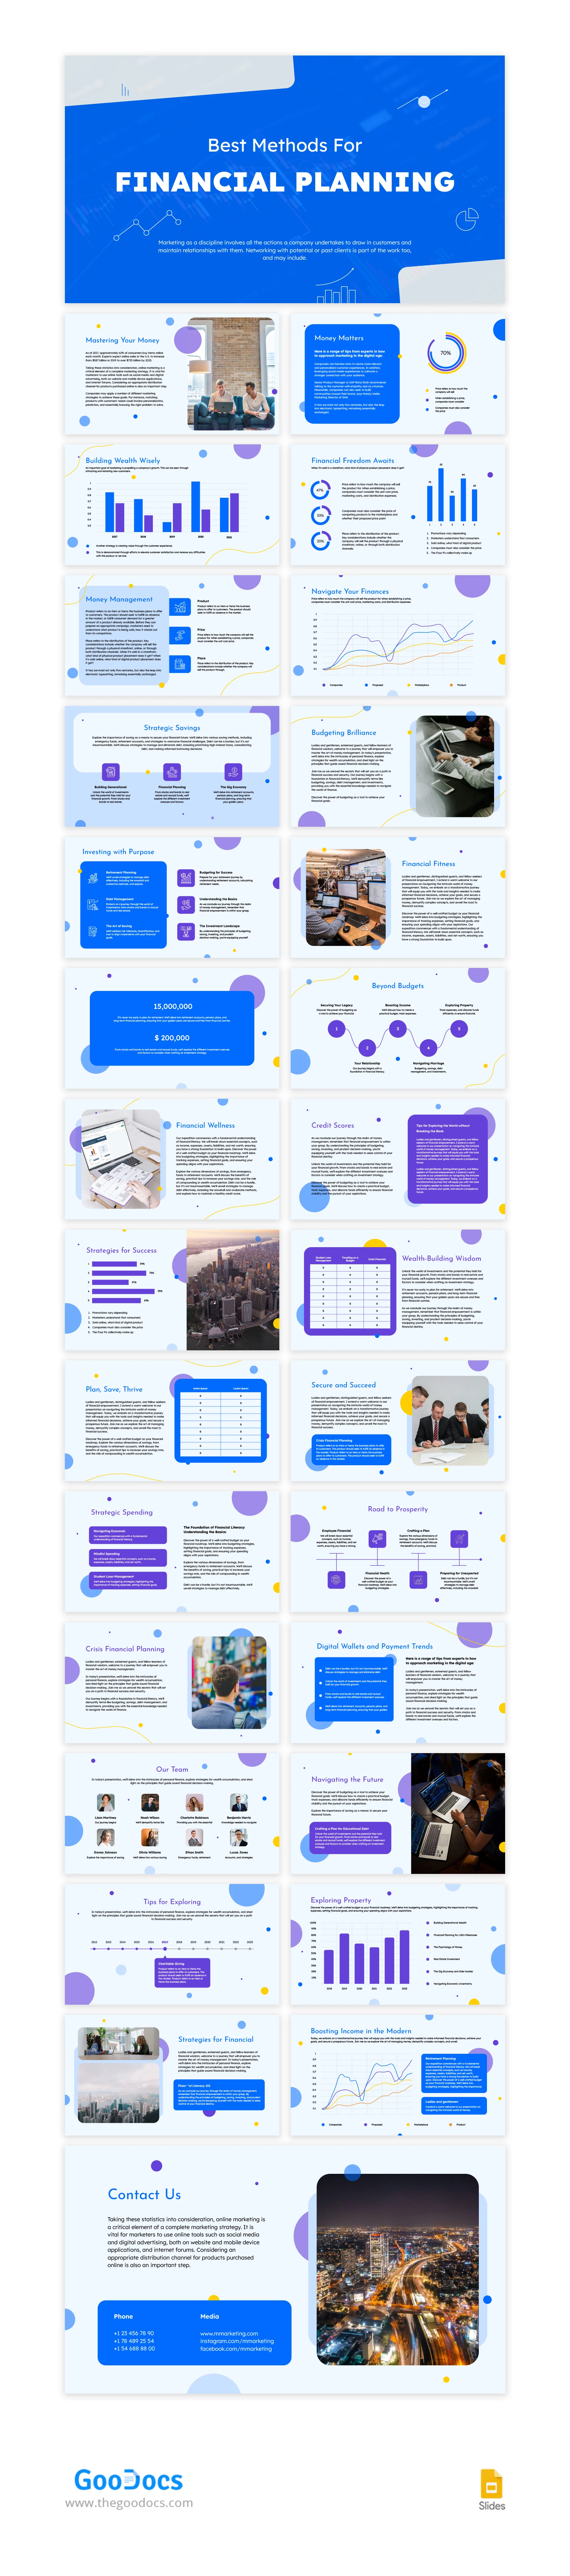 Best Methods for Financial Planning - free Google Docs Template - 10067546